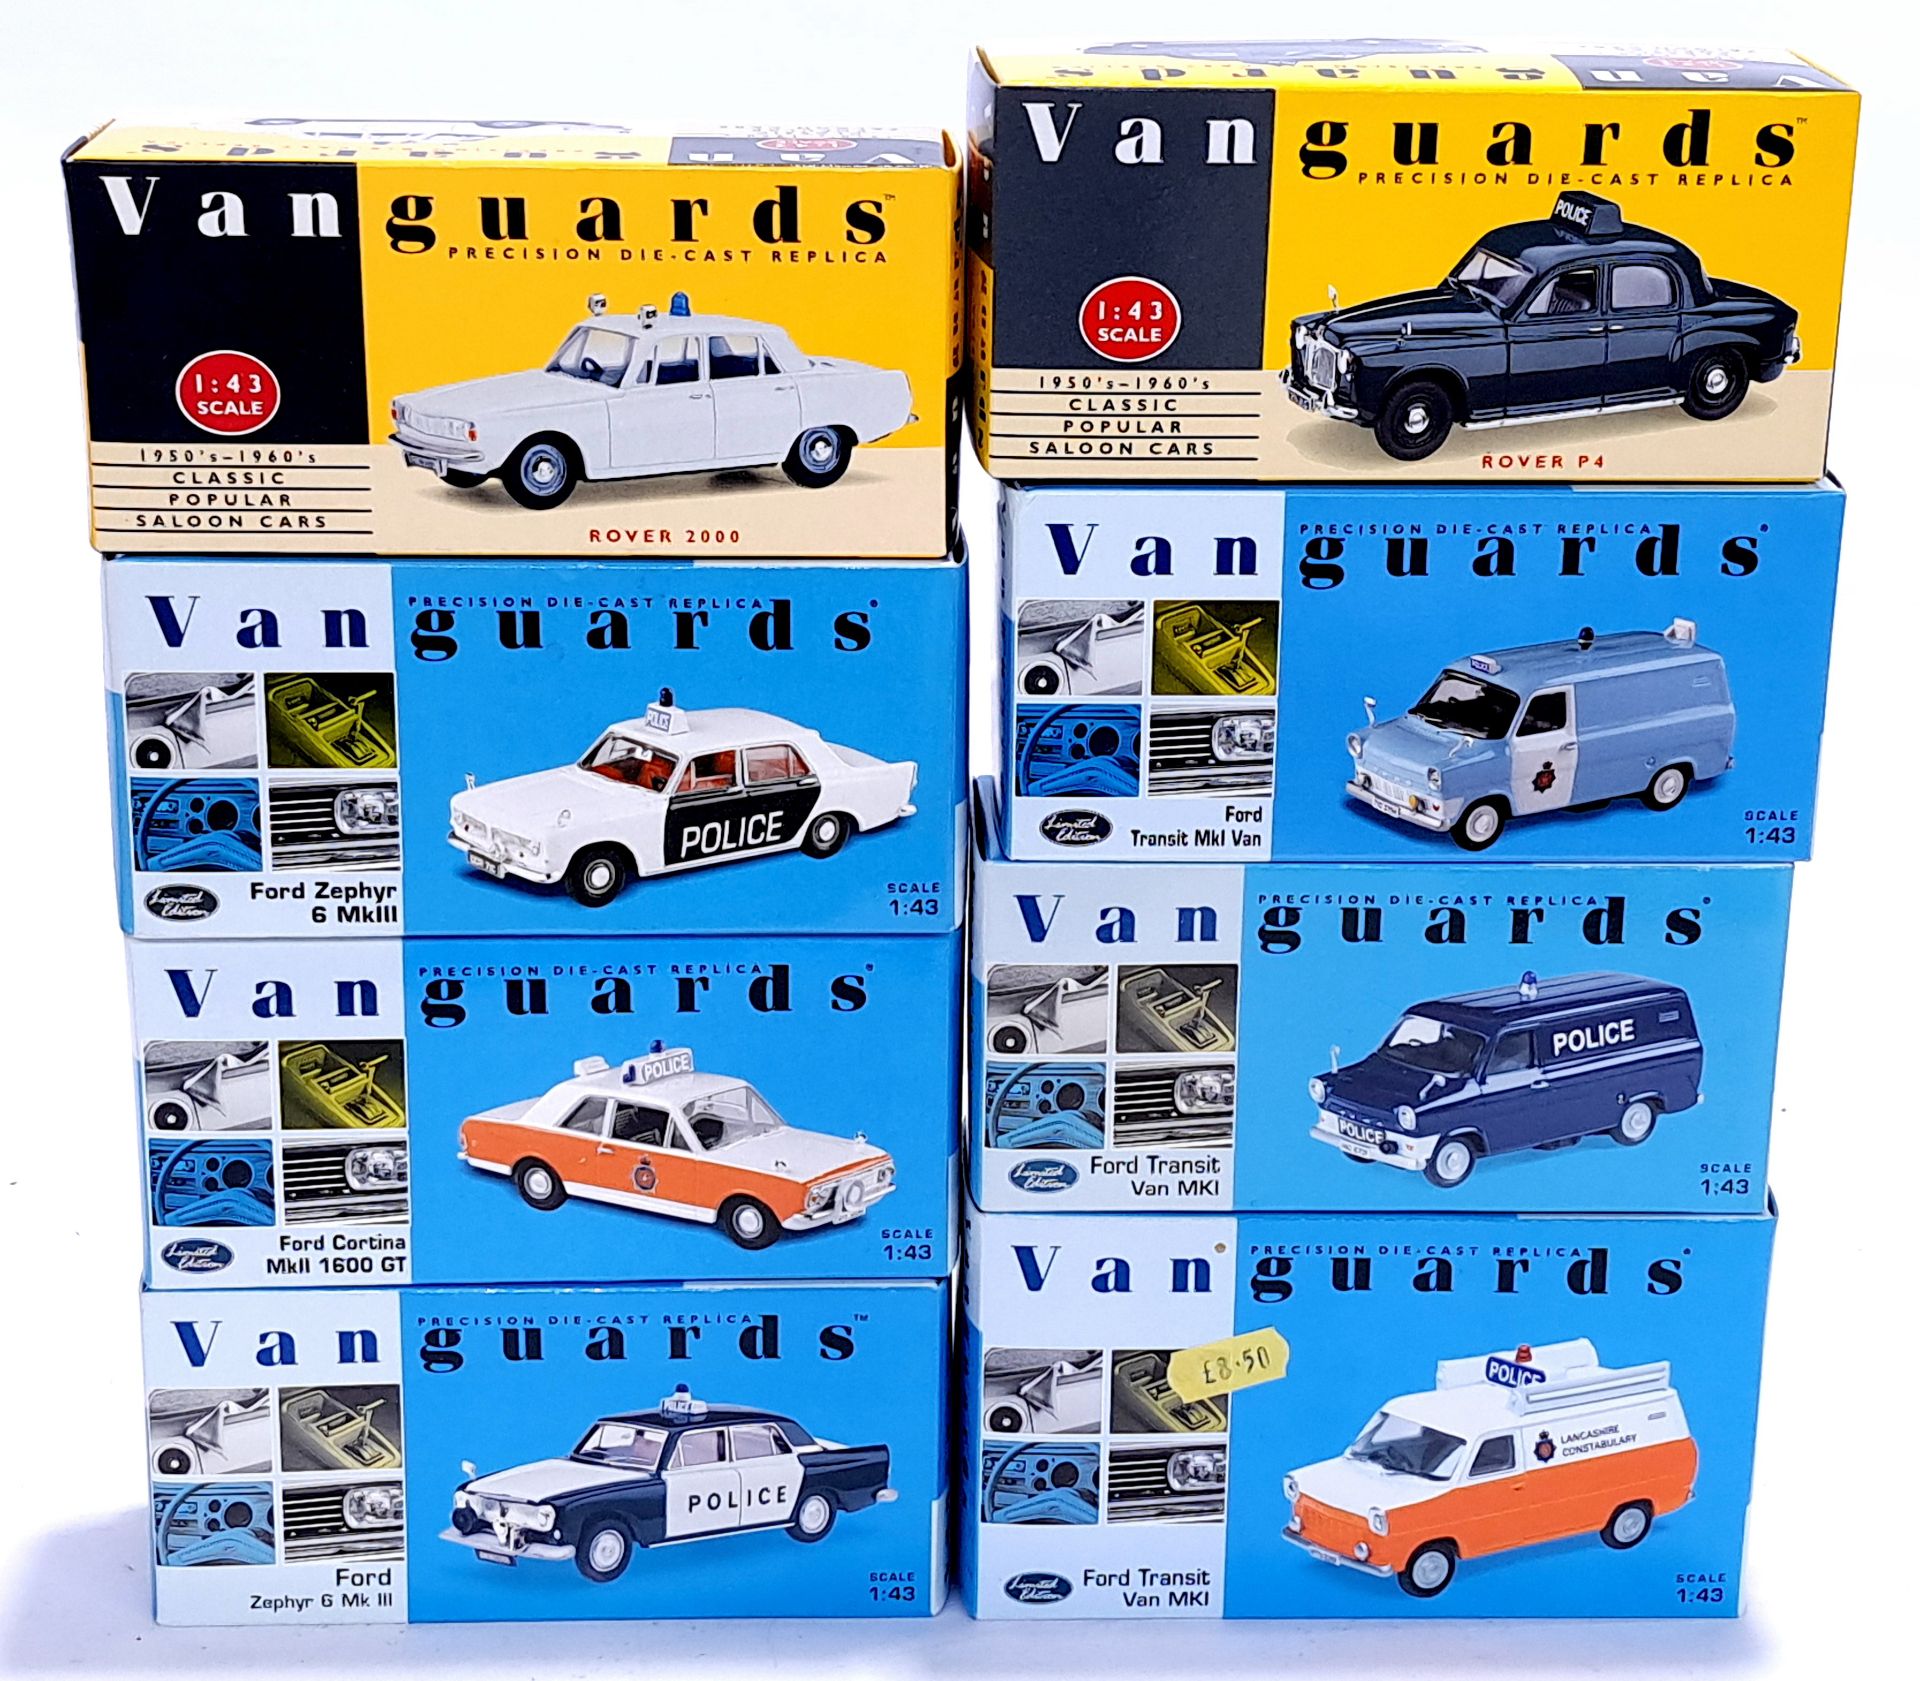 Lledo Vanguards, a boxed 1:43 scale Police group